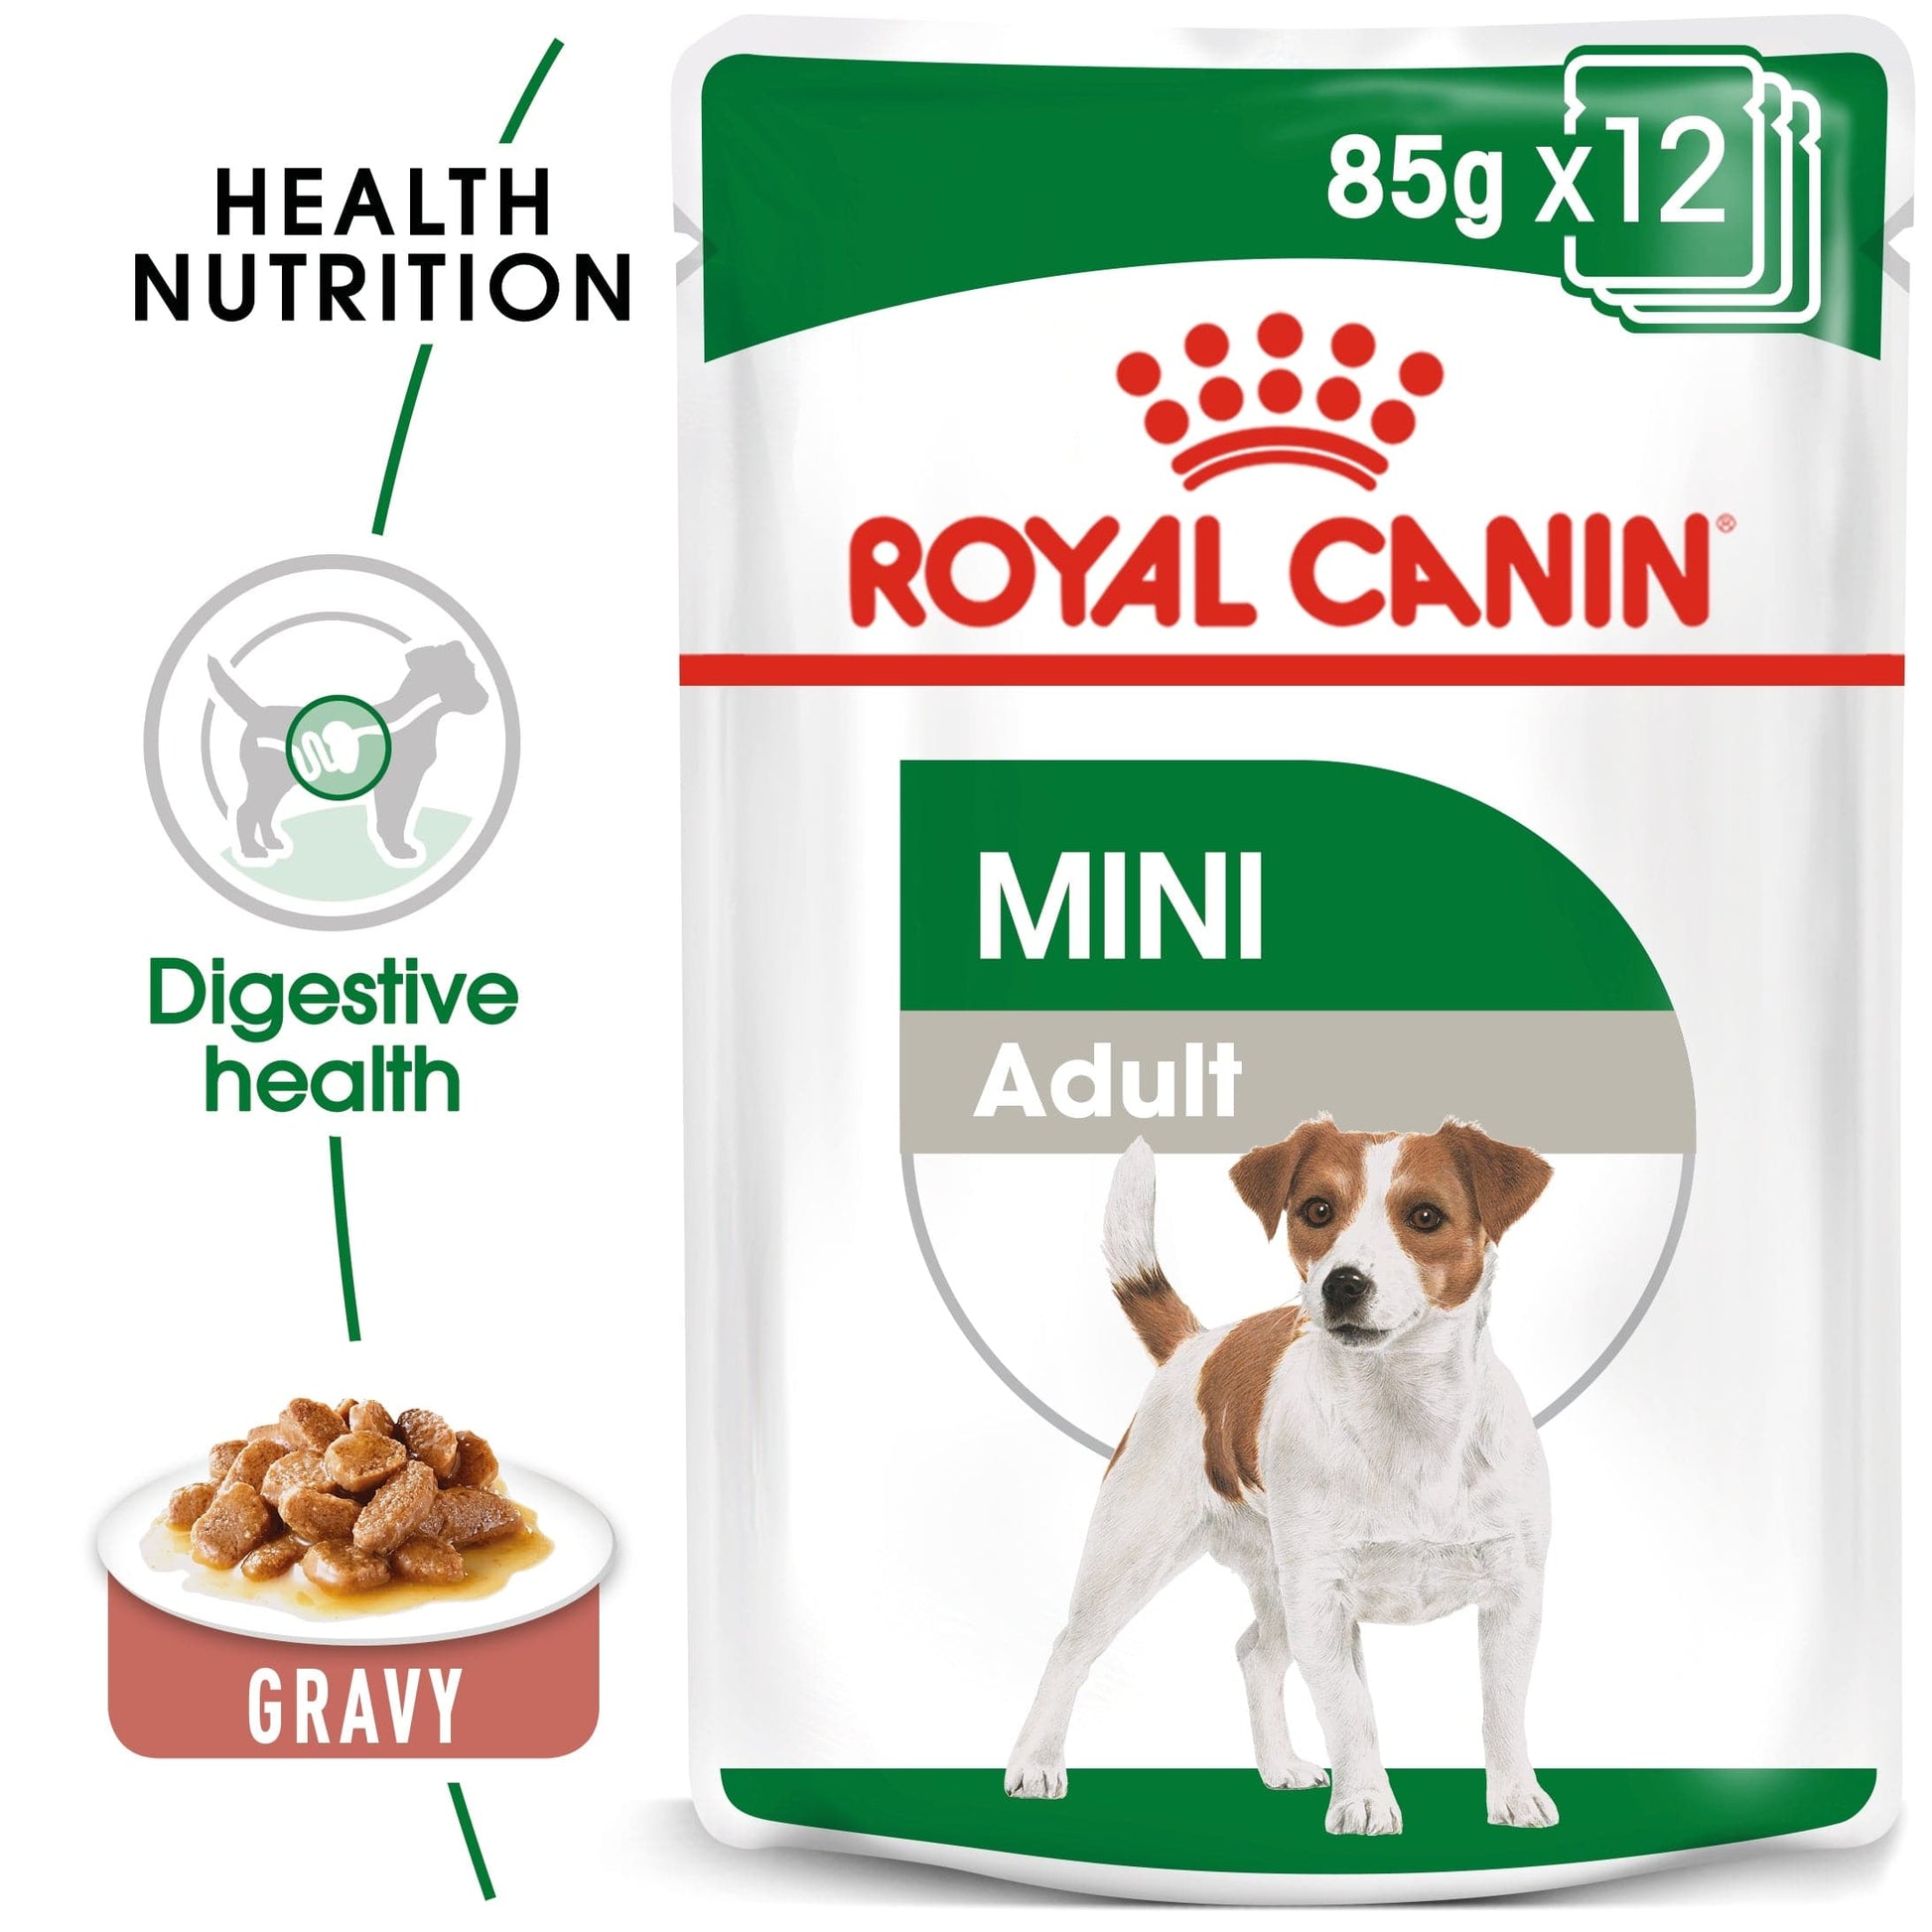 Royal Canin Size Health Nutrition Mini Adult Wet Food Pouch, 85g